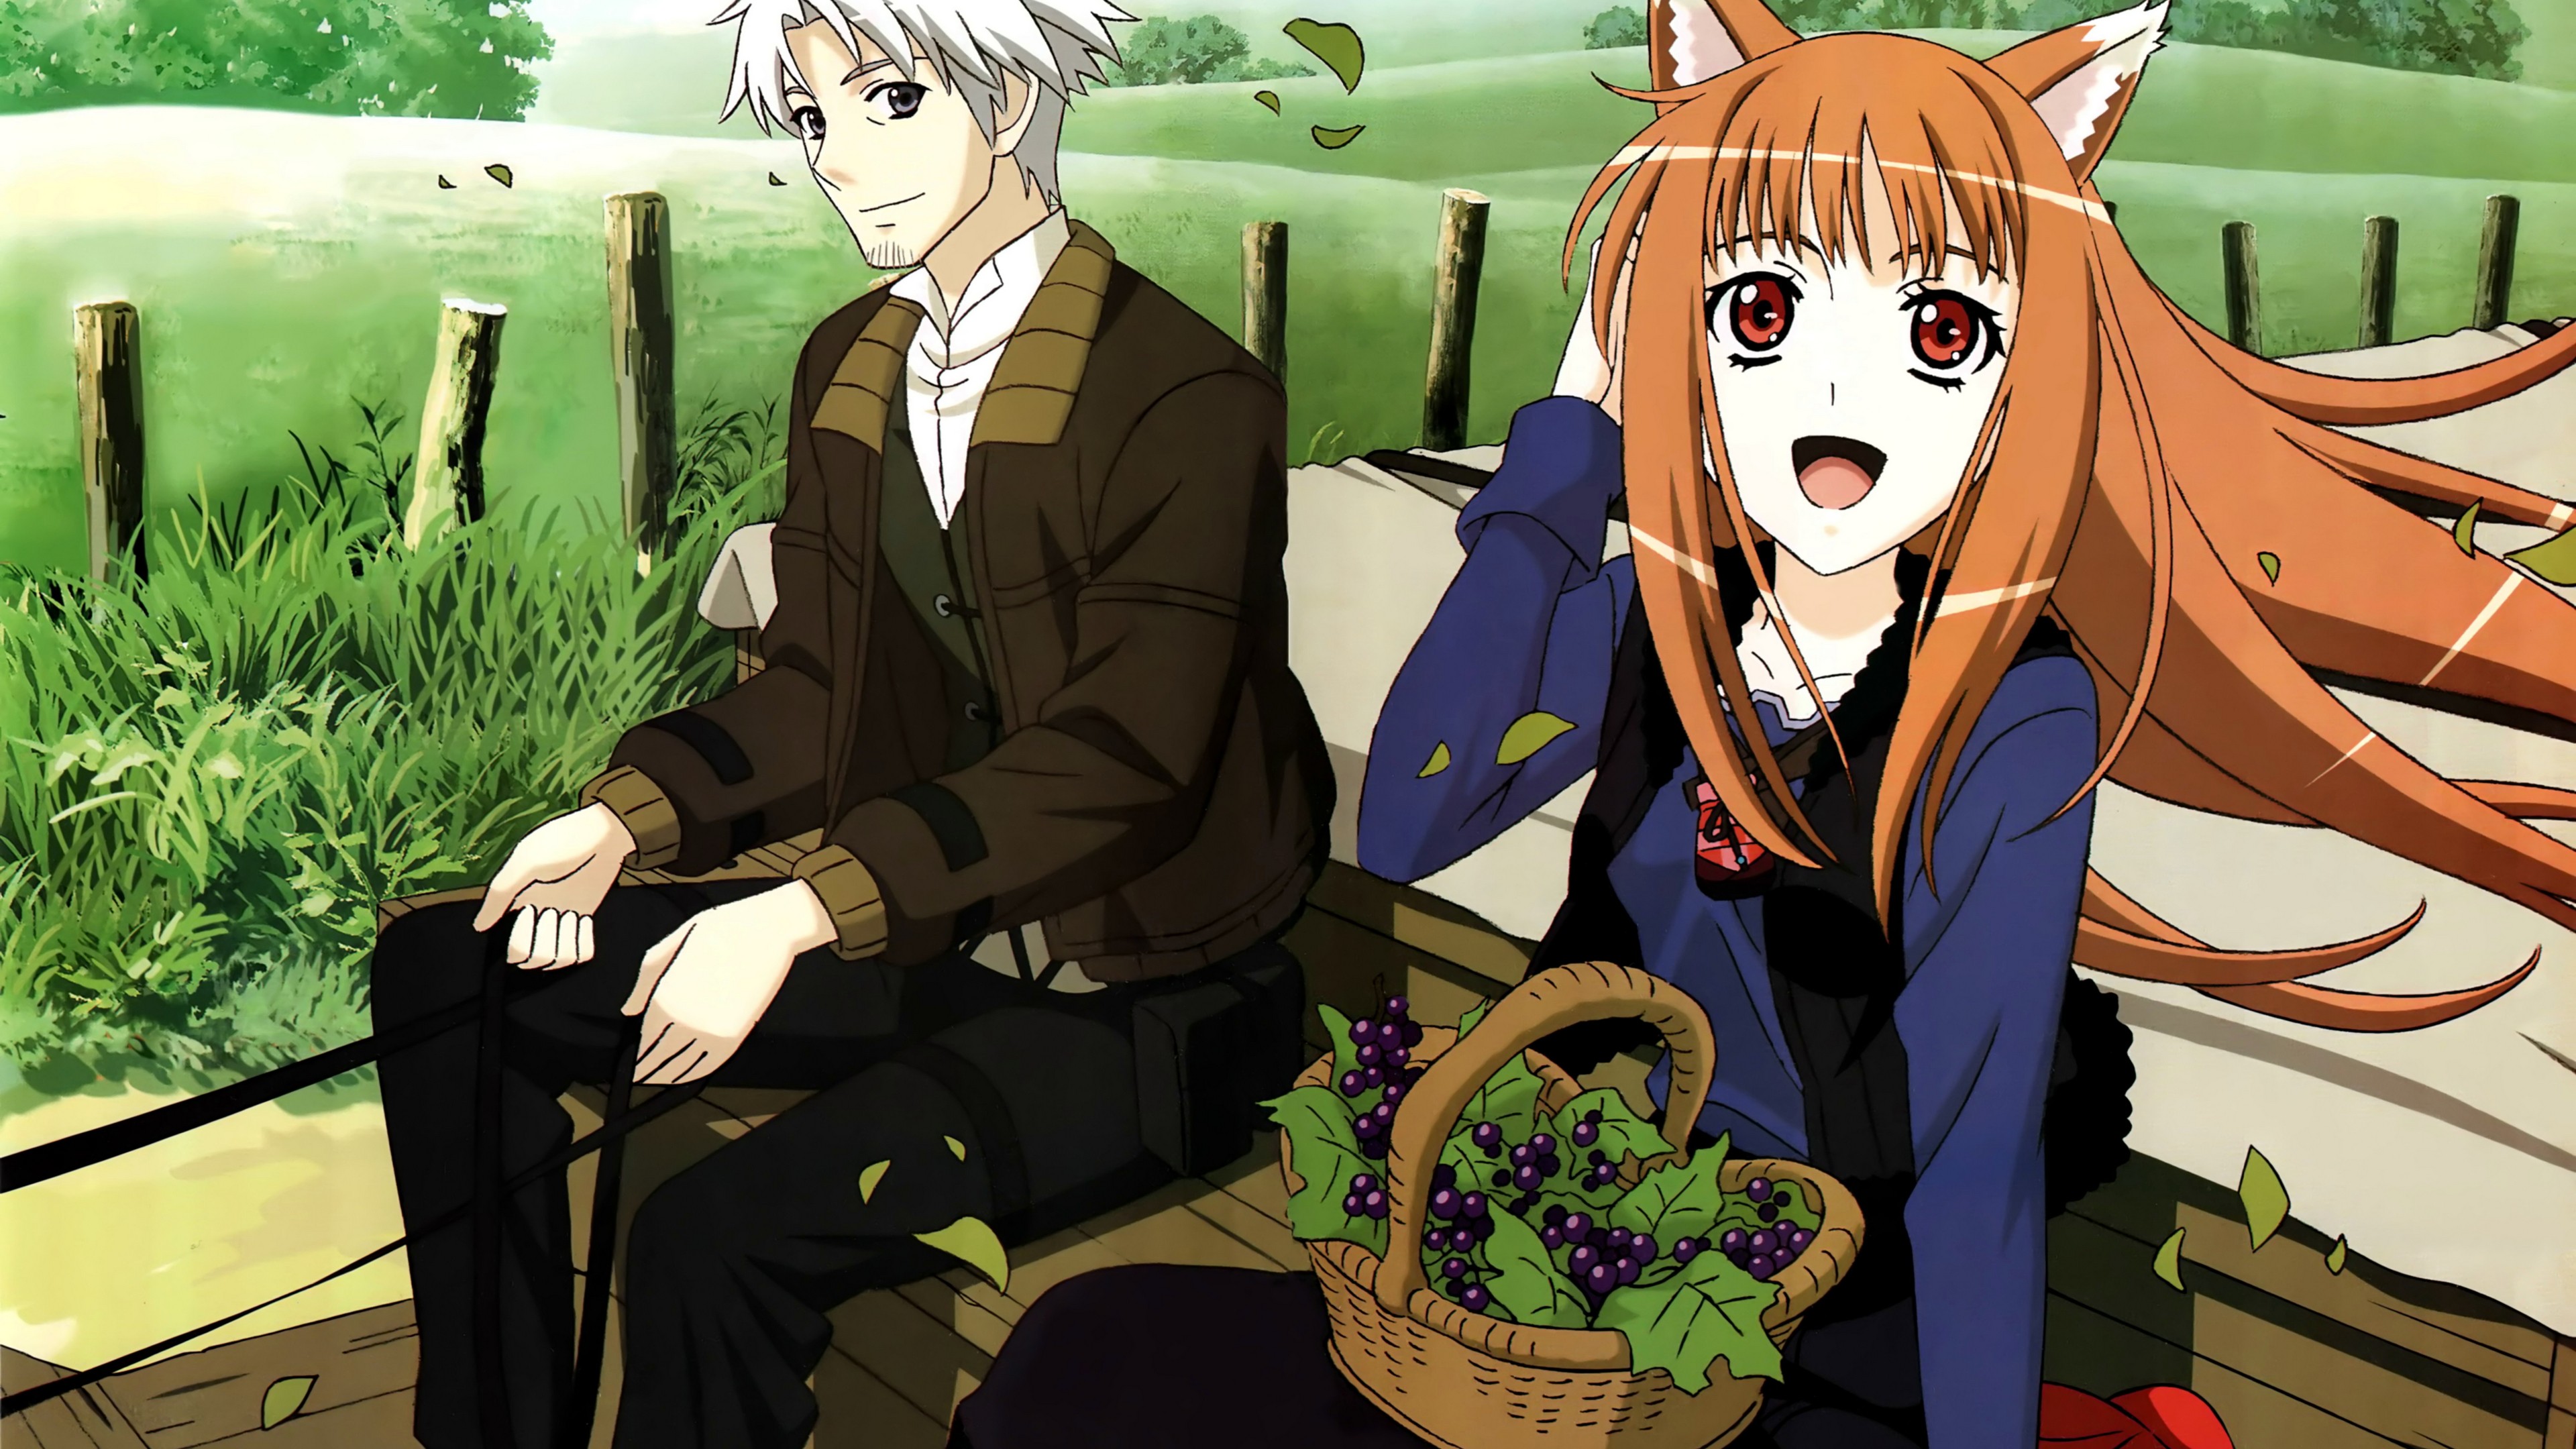 Anime 3840x2160 anime Spice and Wolf Holo (Spice and Wolf) anime girls baskets food fruit berries anime boys